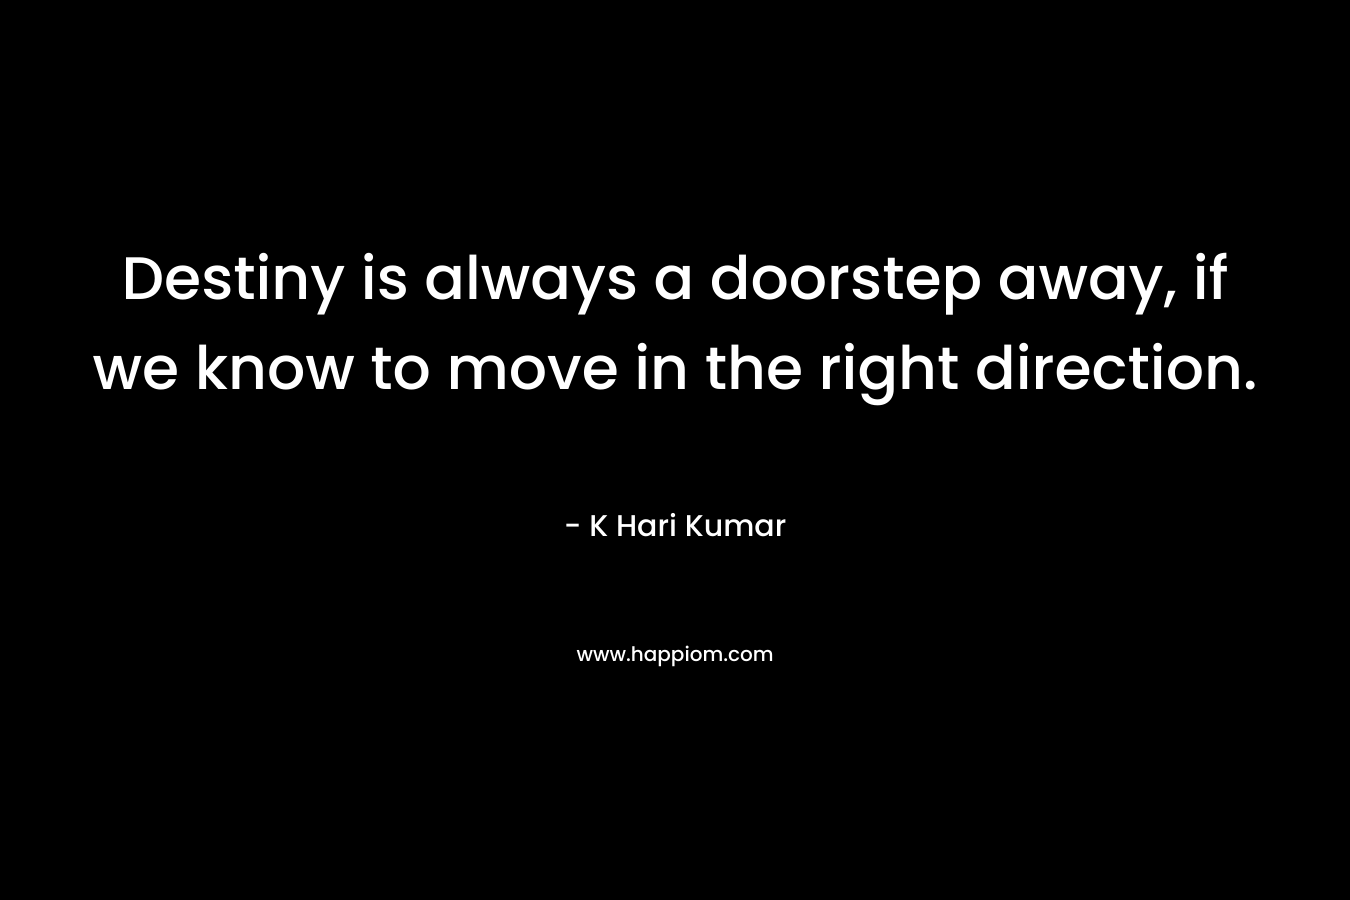 Destiny is always a doorstep away, if we know to move in the right direction.